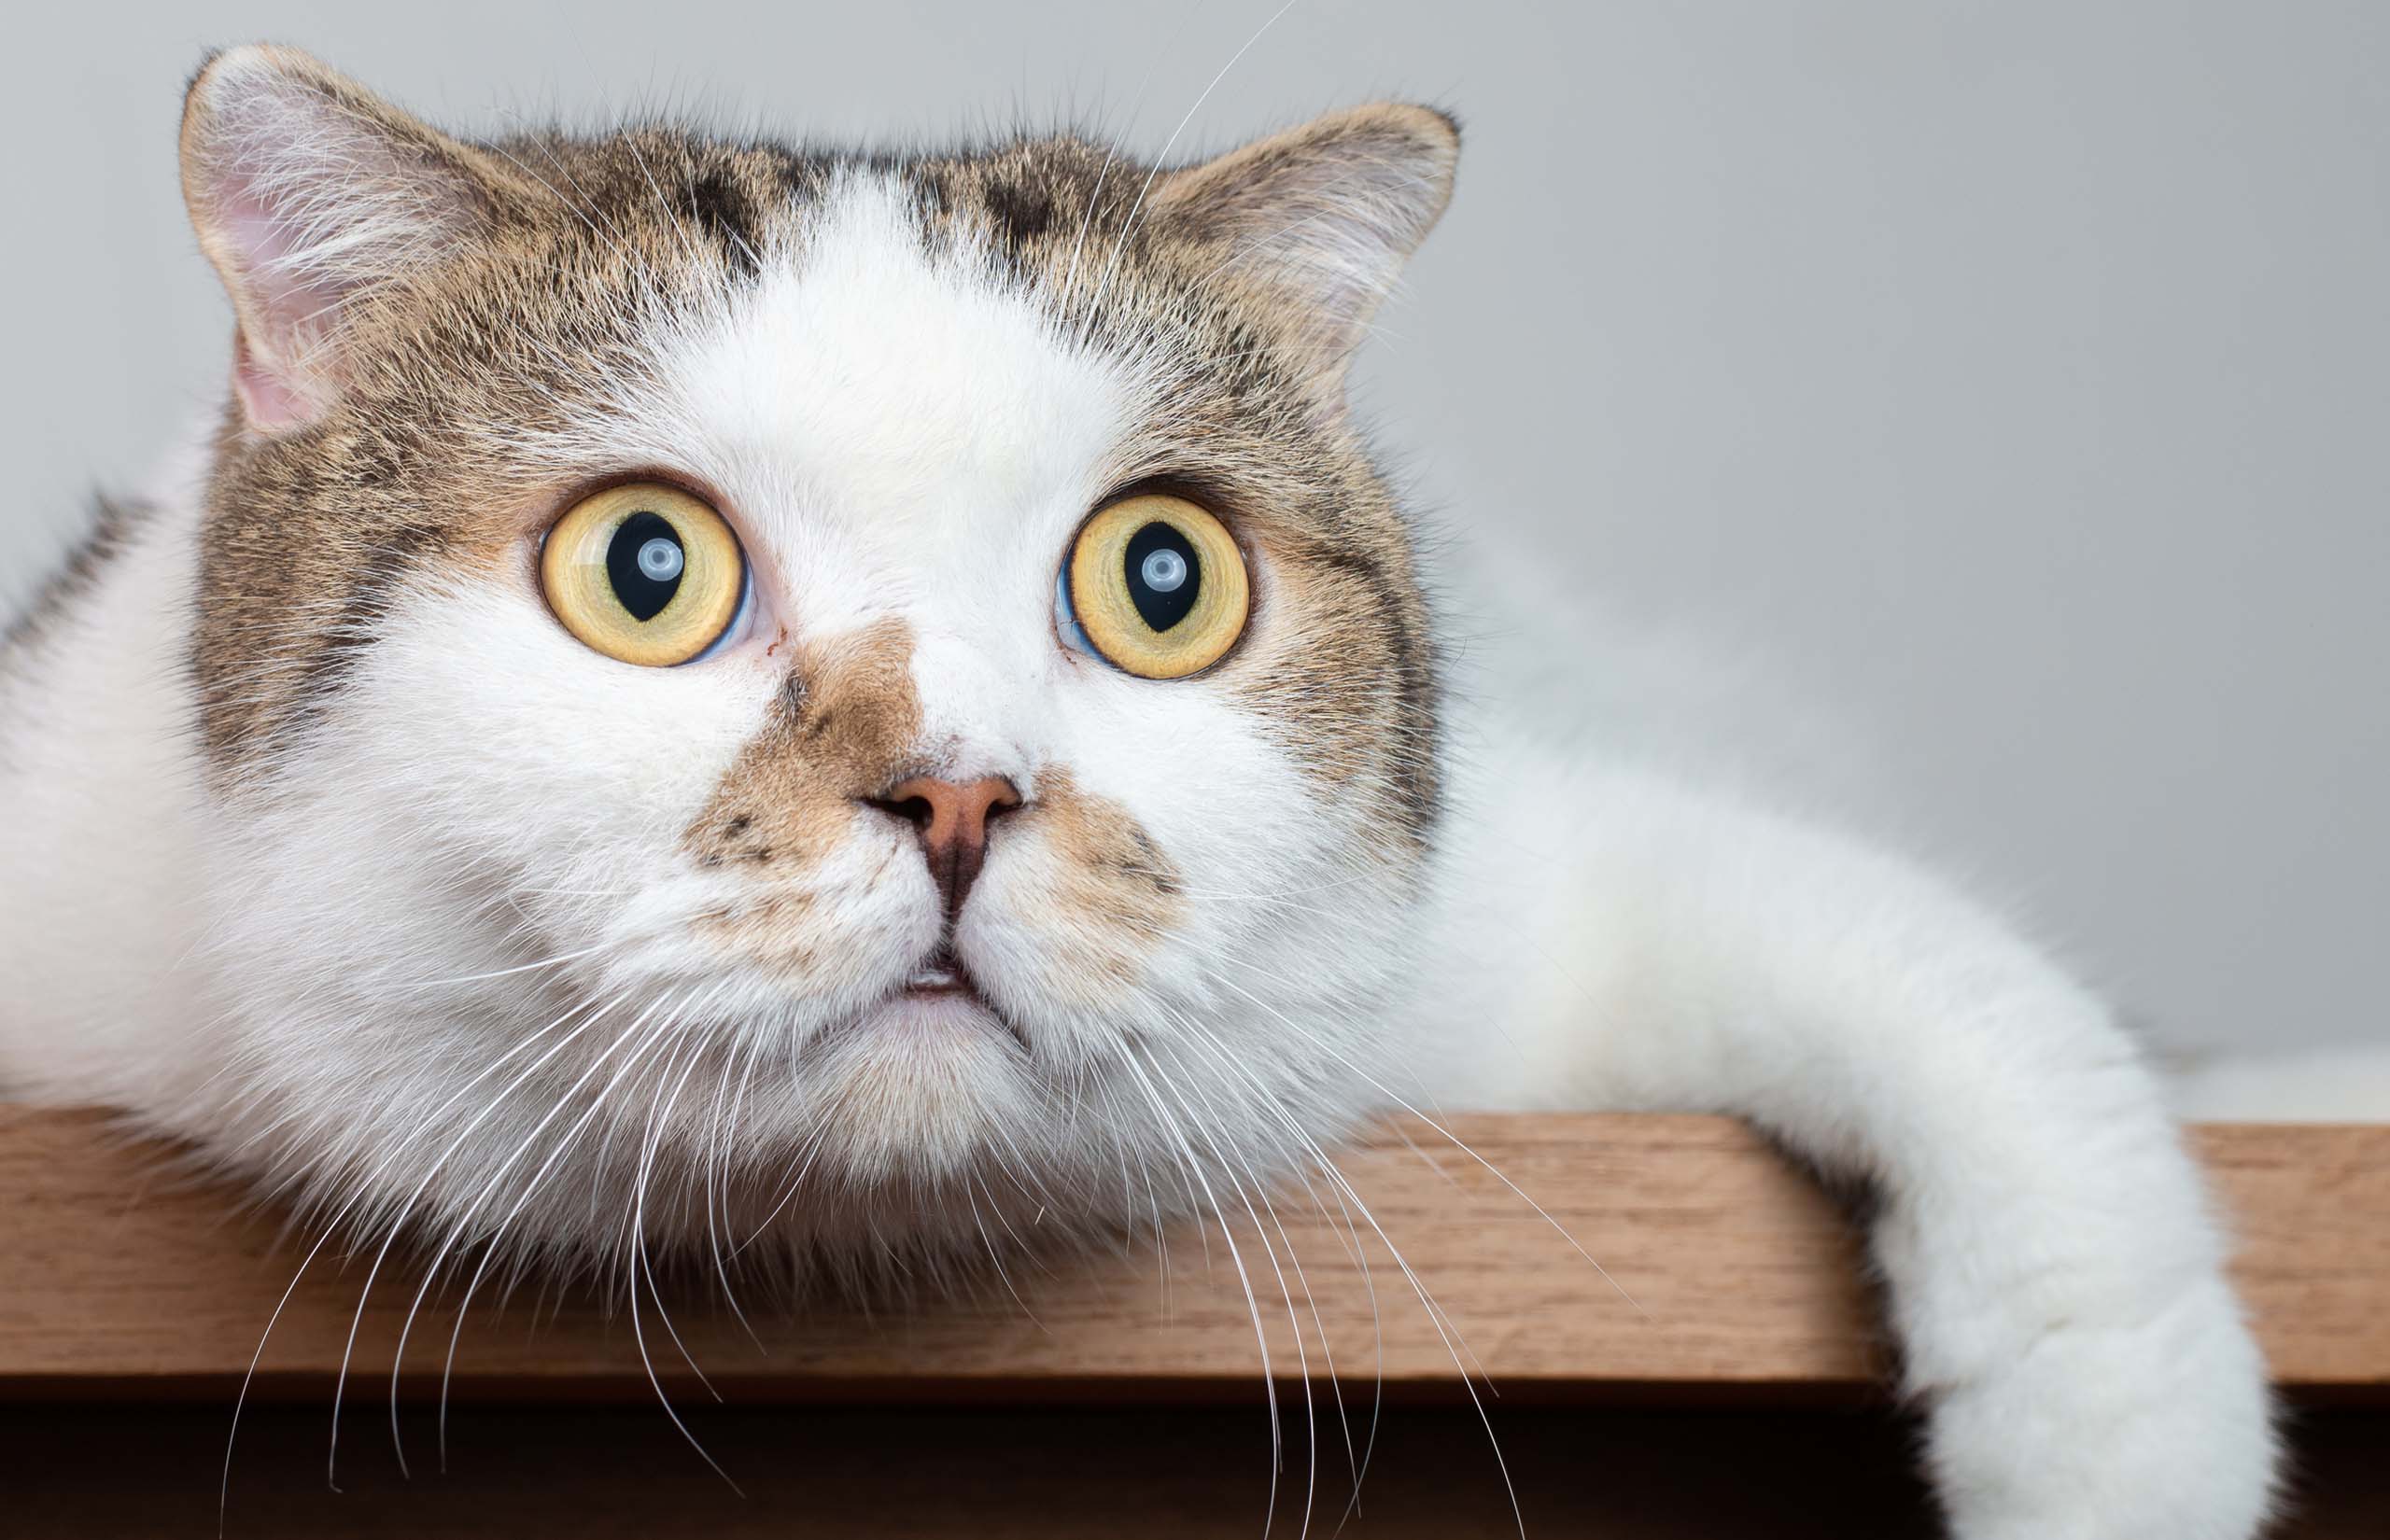 Discovered:
domestic cats have 276 different facial expressions